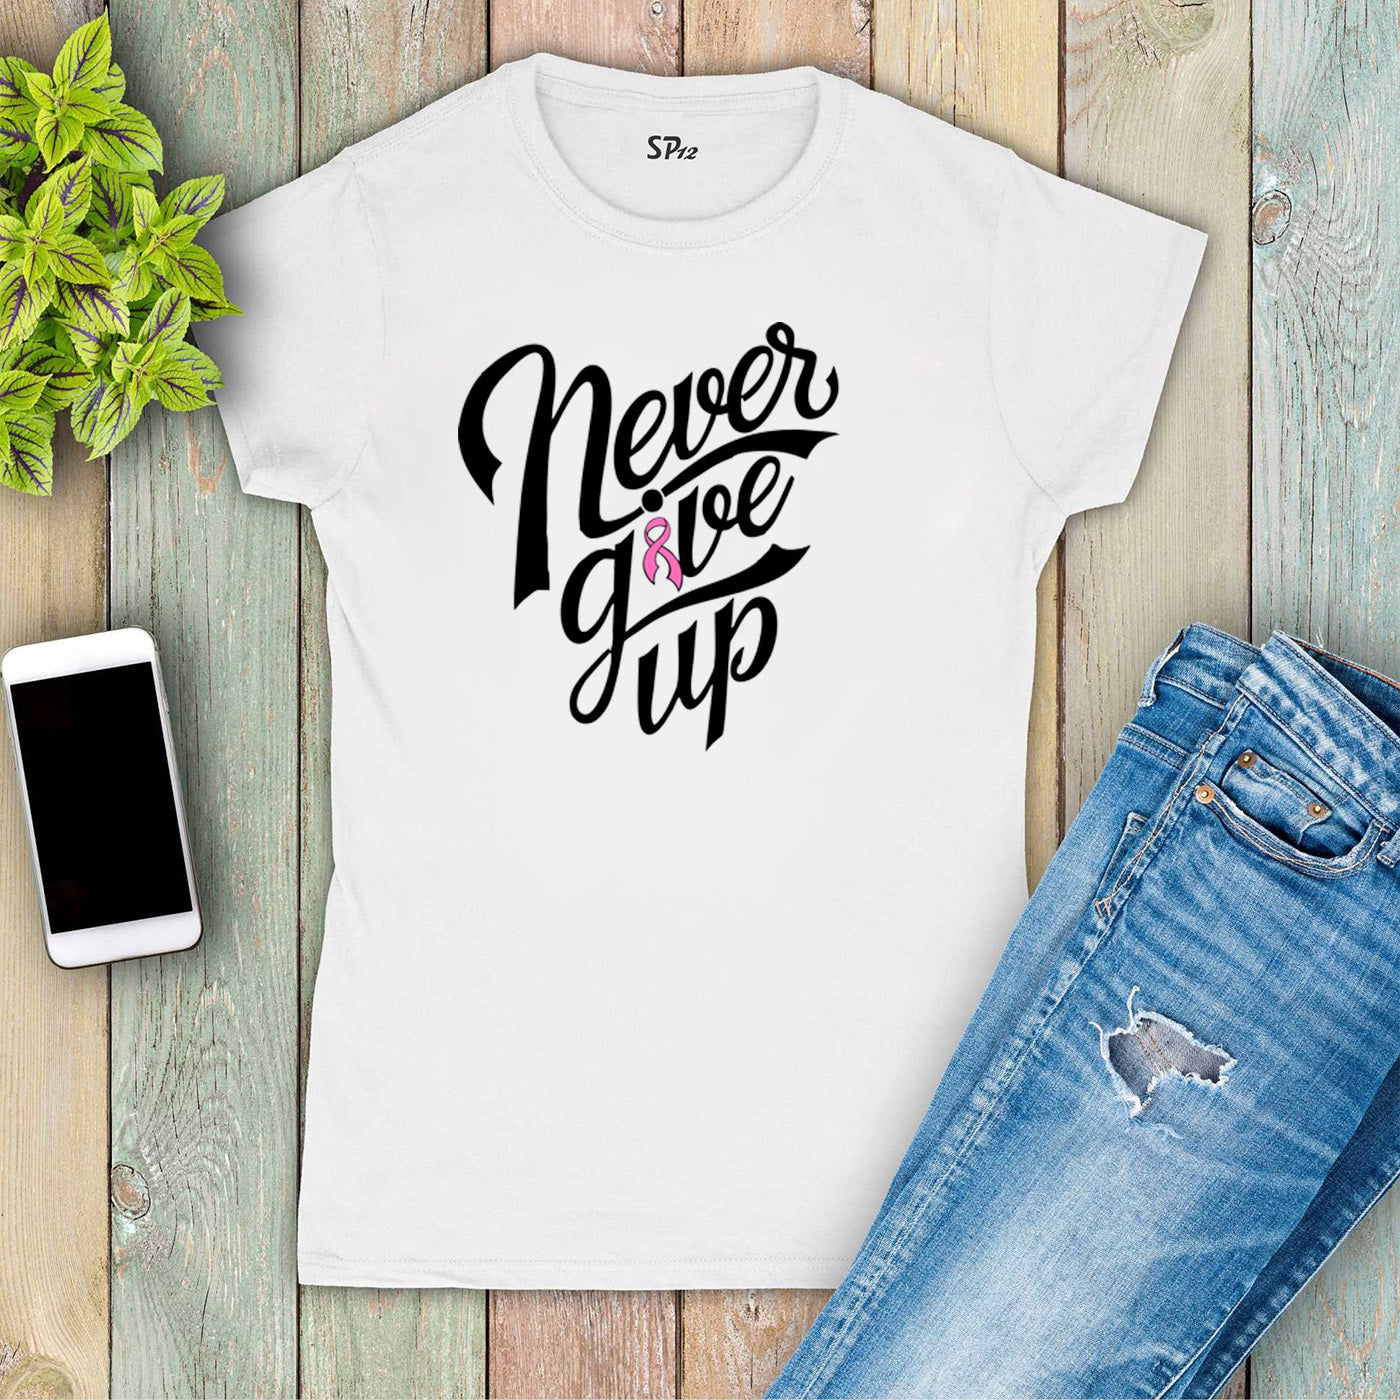 Never Give Up Breast Cancer Awareness Women T Shirt